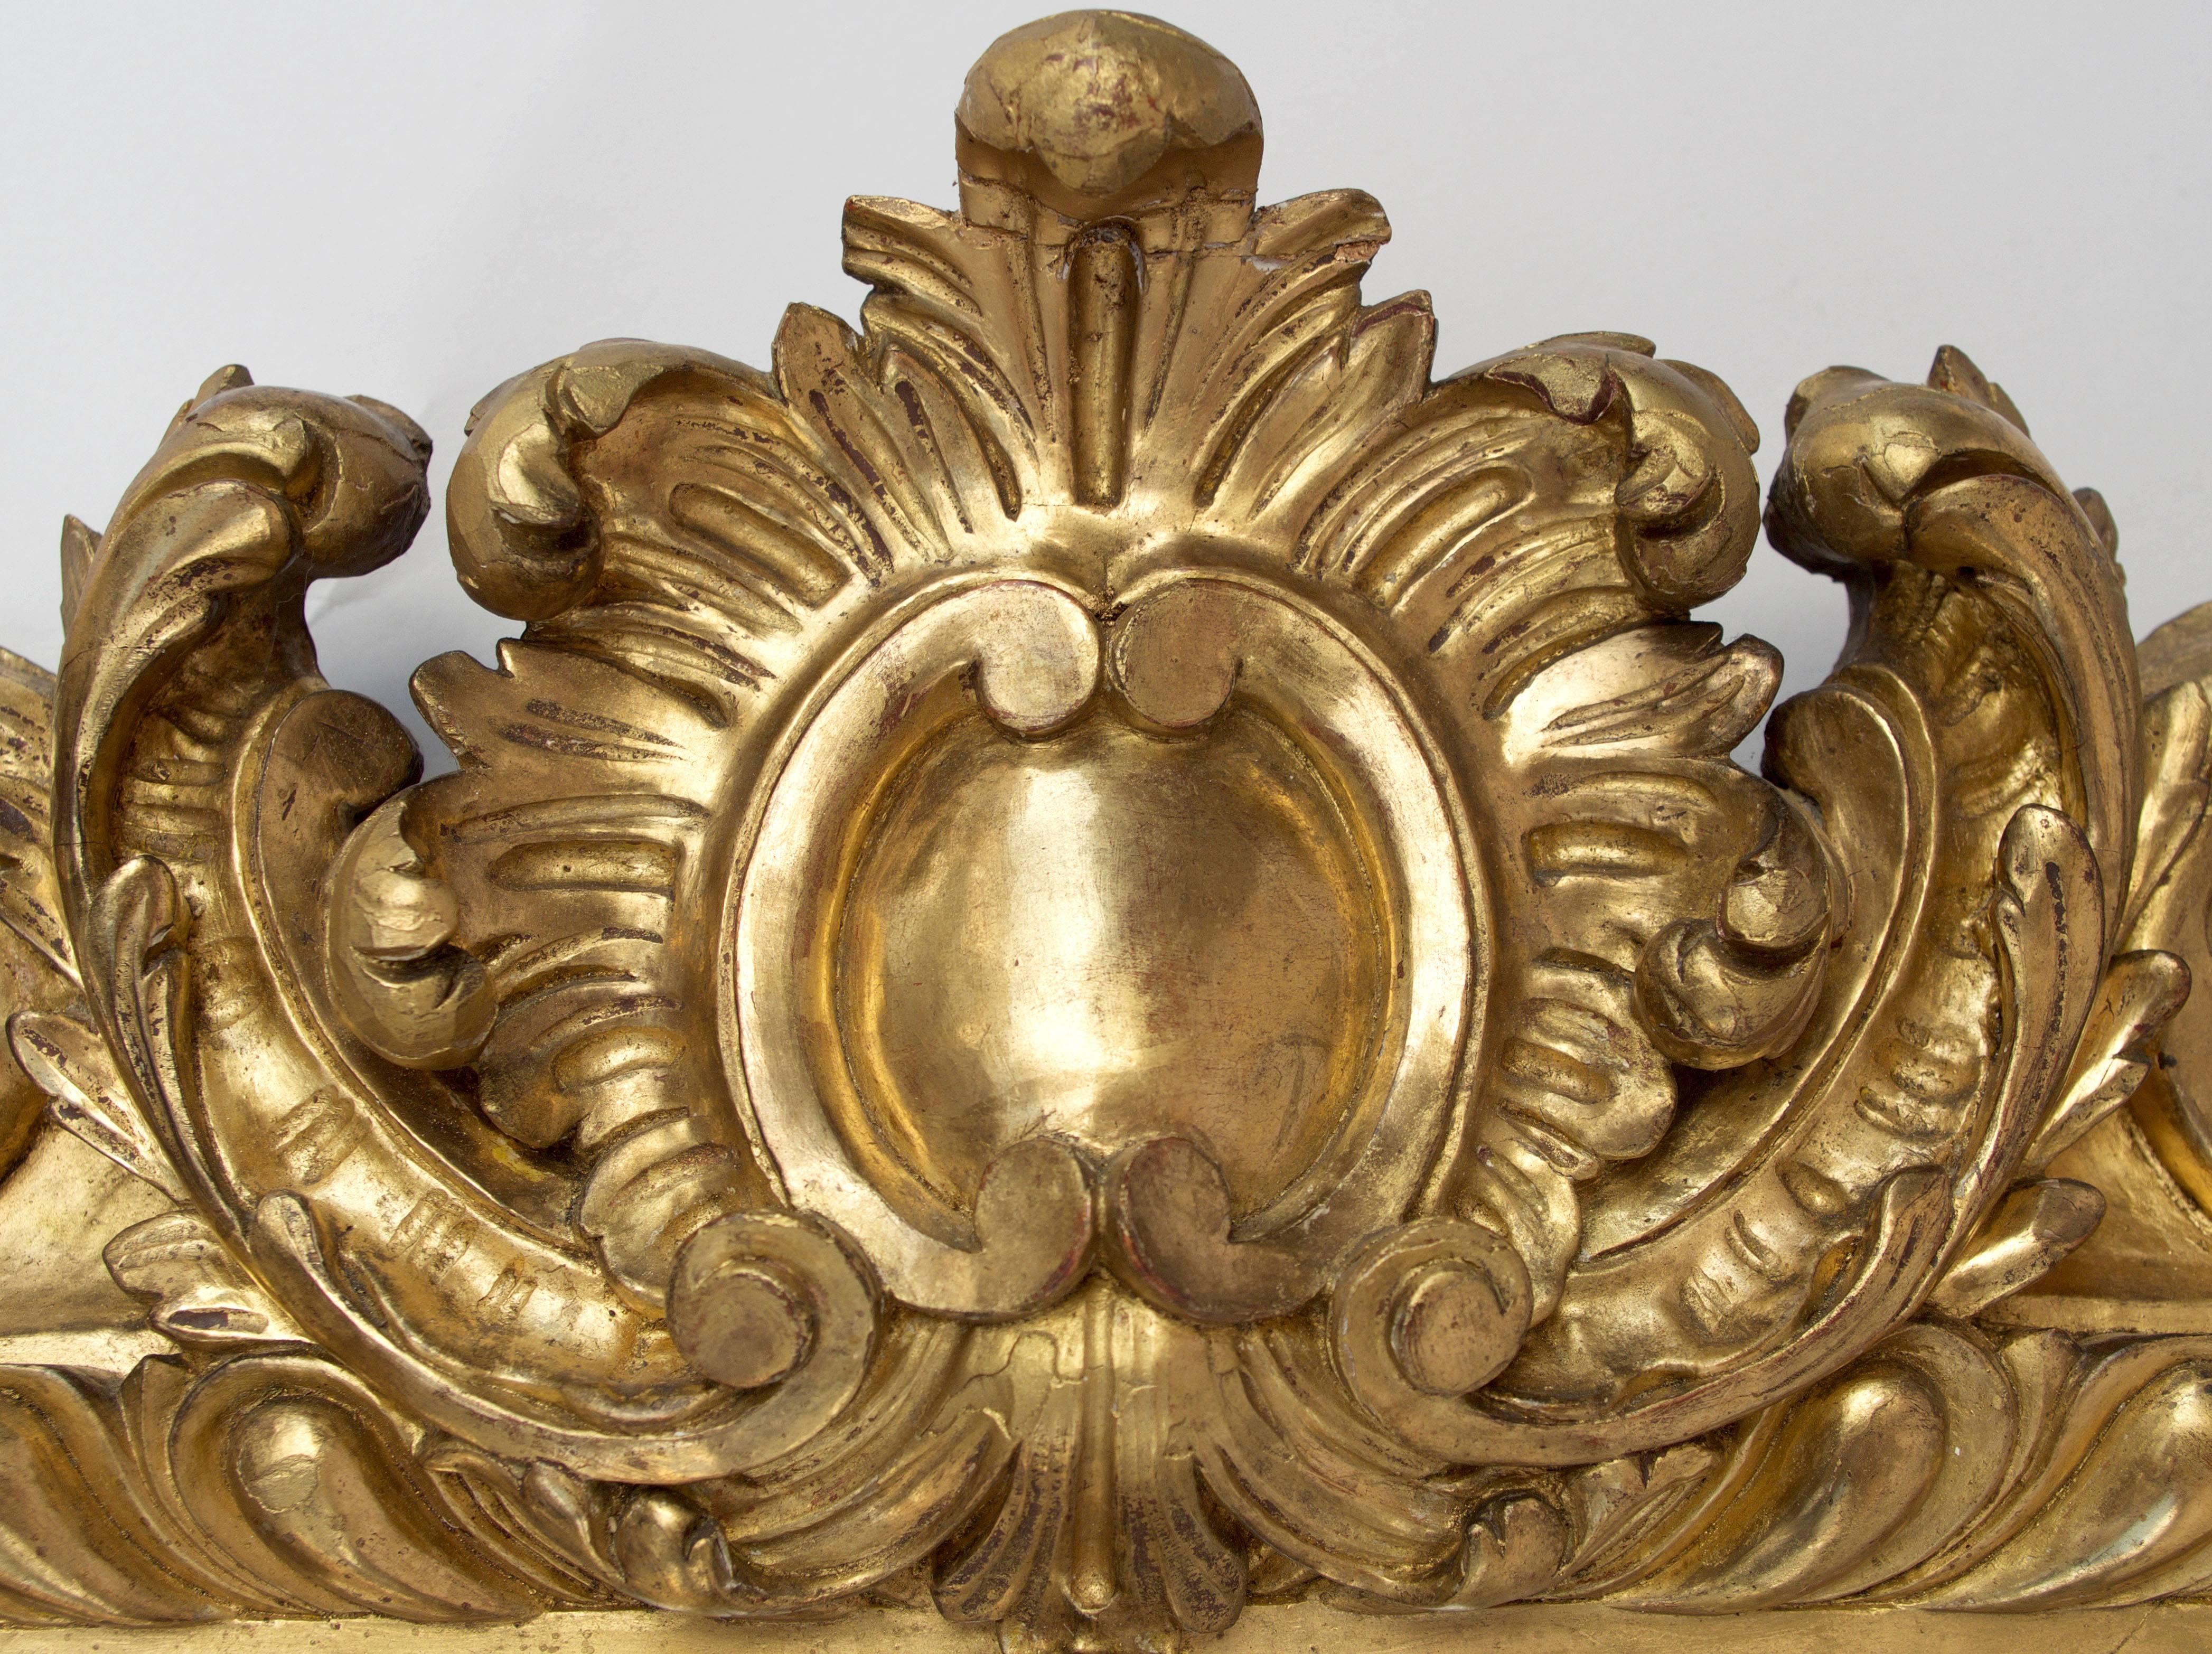 Rectangular small Regence style mirror in carved and giltwood.
Frame adorned with a thick gadroon frieze and embellished with shells, plans and flowers scrolled. 
A Cartouche in the Meissonnier style ornaments decorated the upper central part of